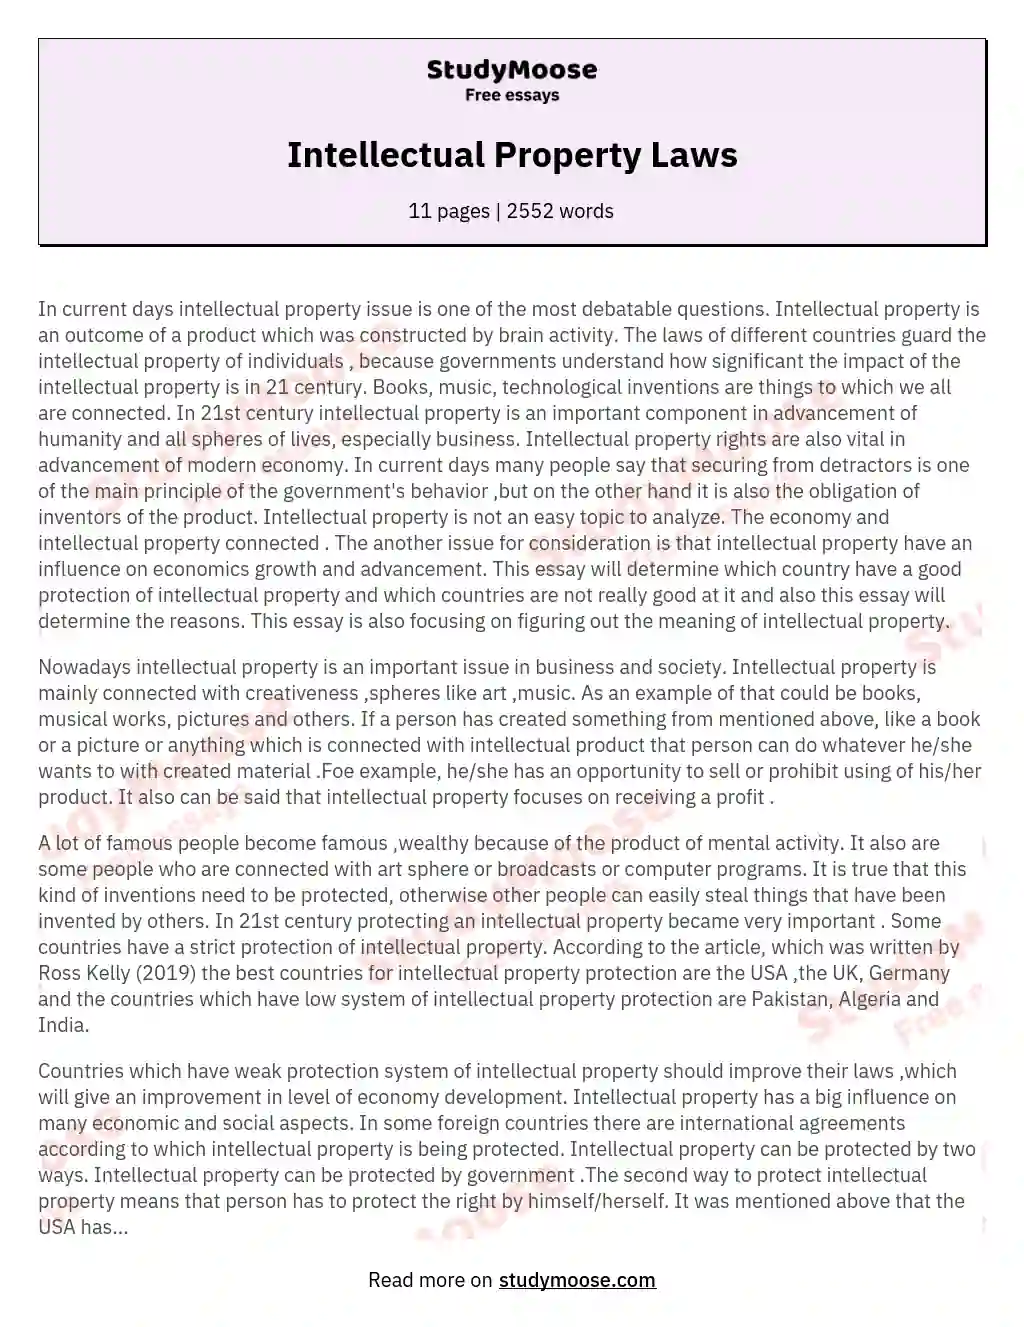 intellectual property rights essay 250 words